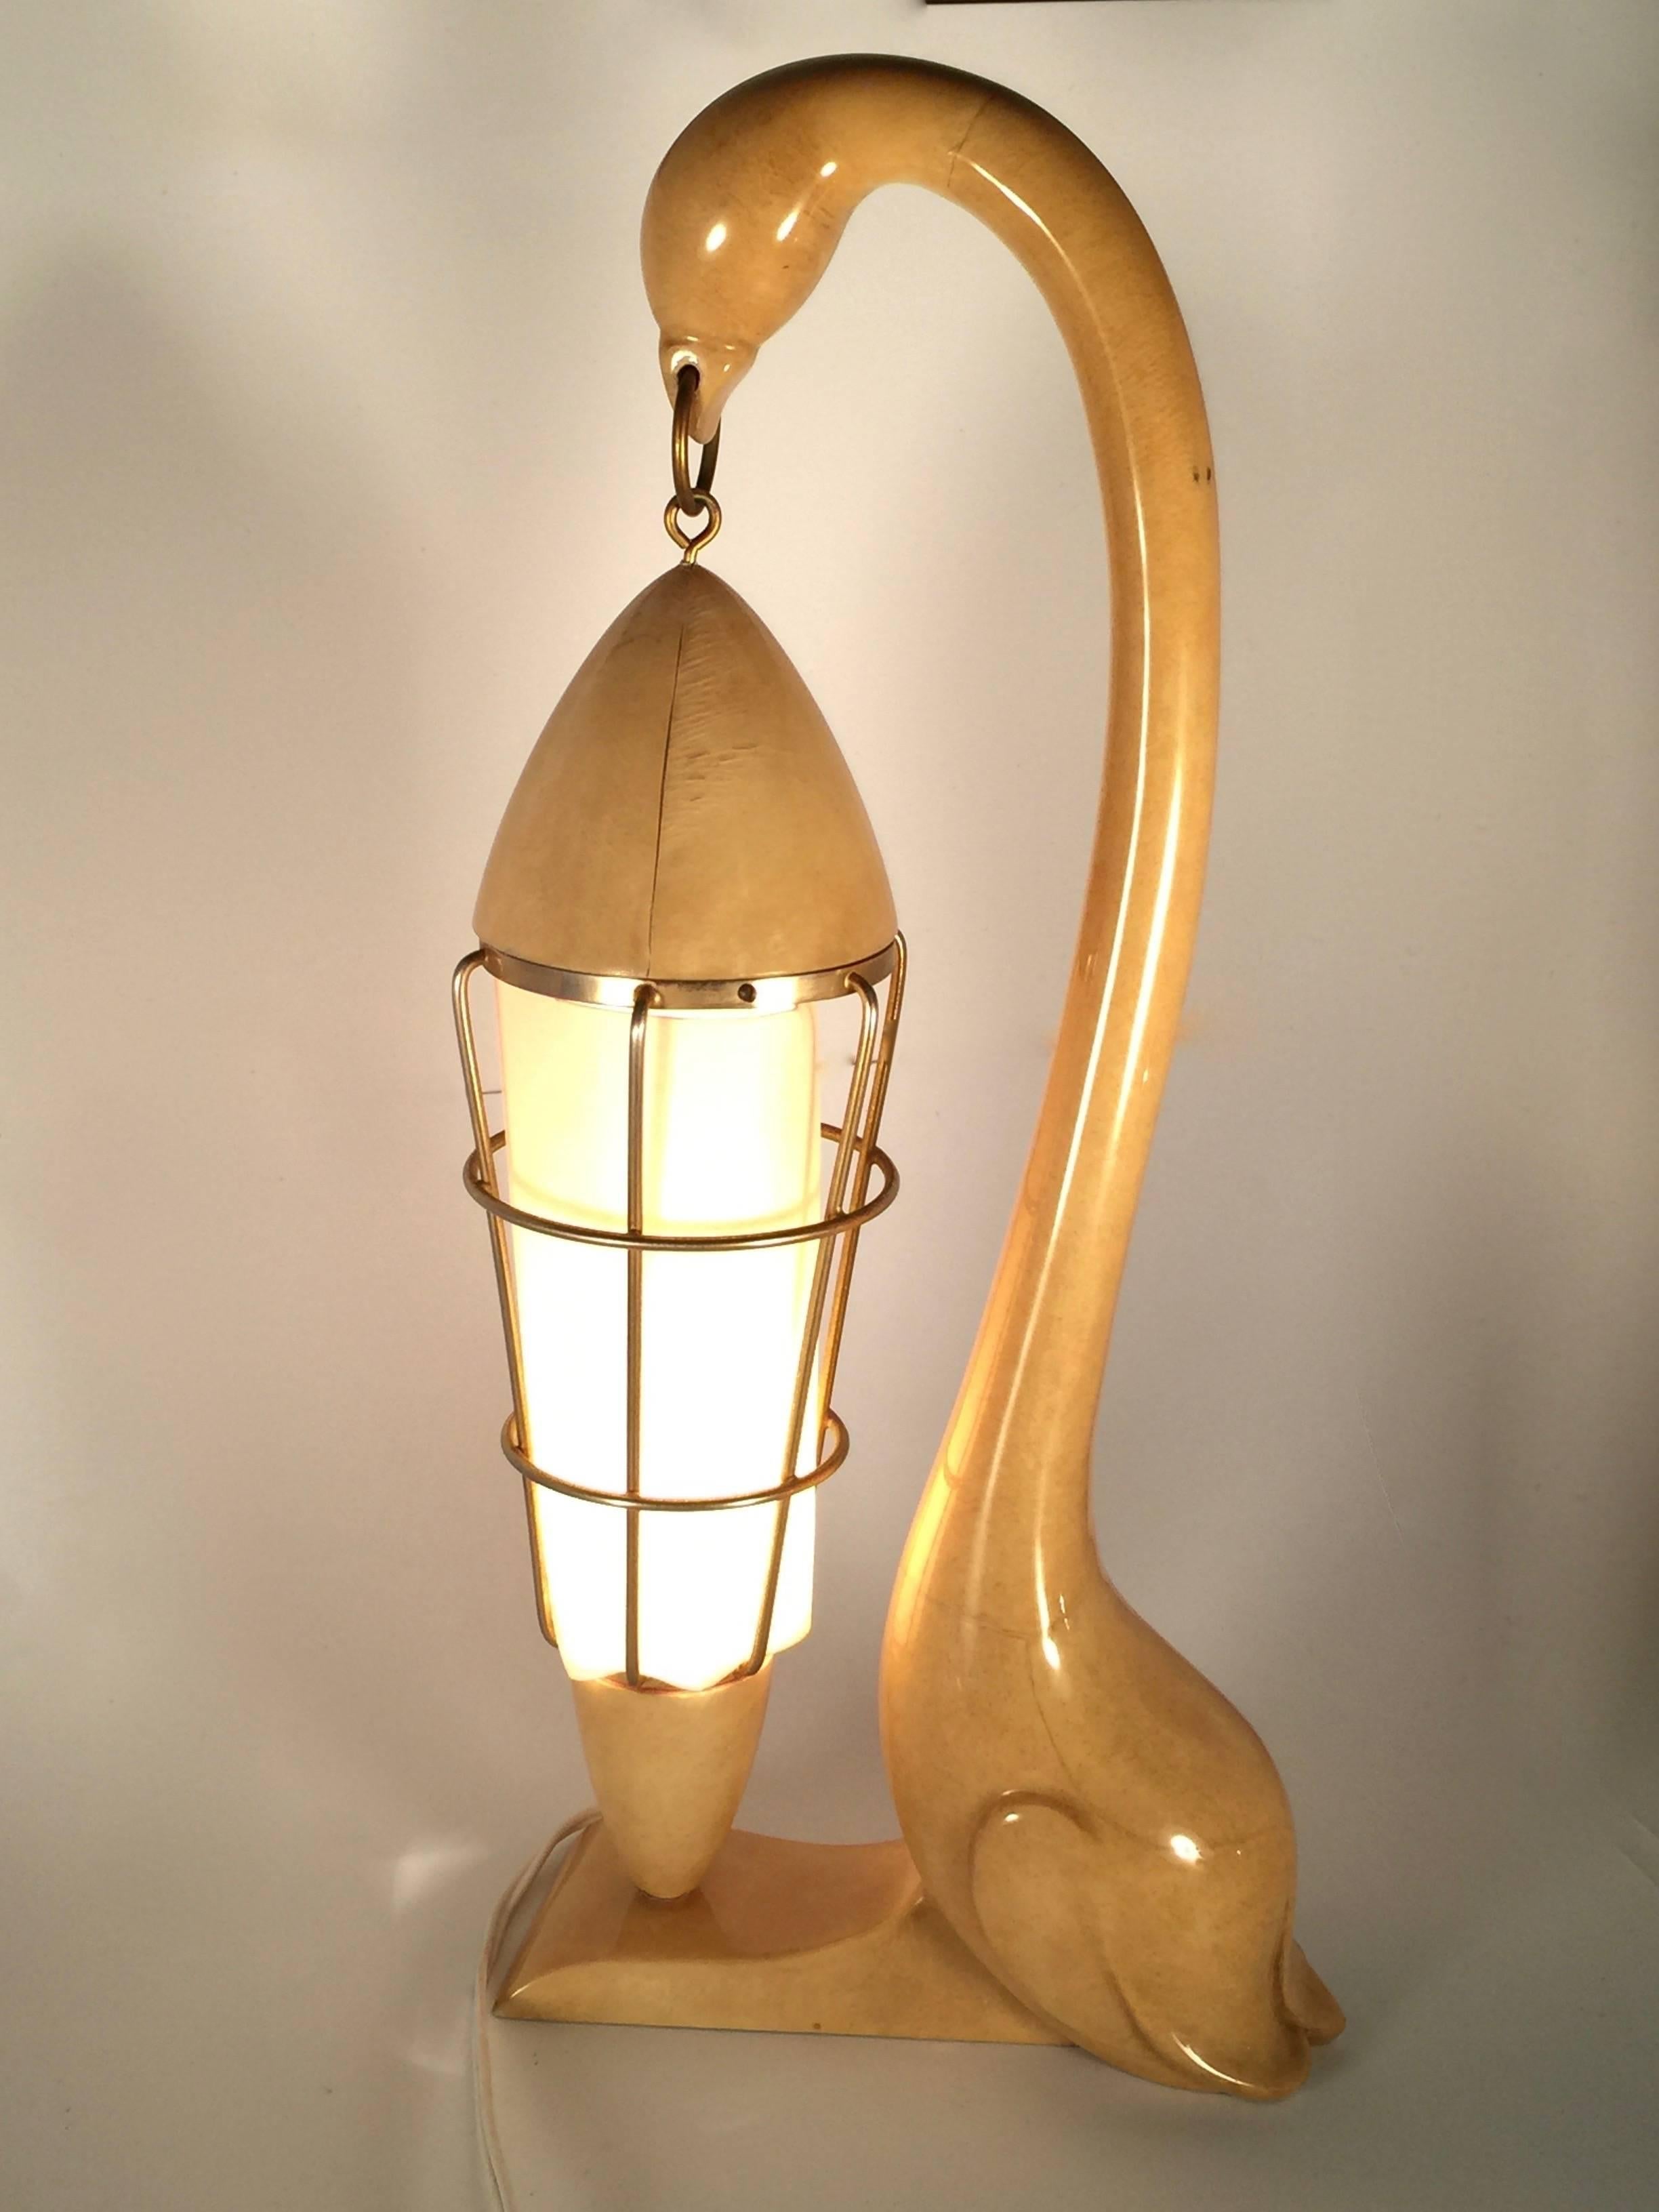 Vintage Aldo Tura goatskin, wood and brass lamp. 

1950s Made in Italy.

This piece is in good vintage condition with porous grains on the brass details.

An amazing and seldom piece in this condition.